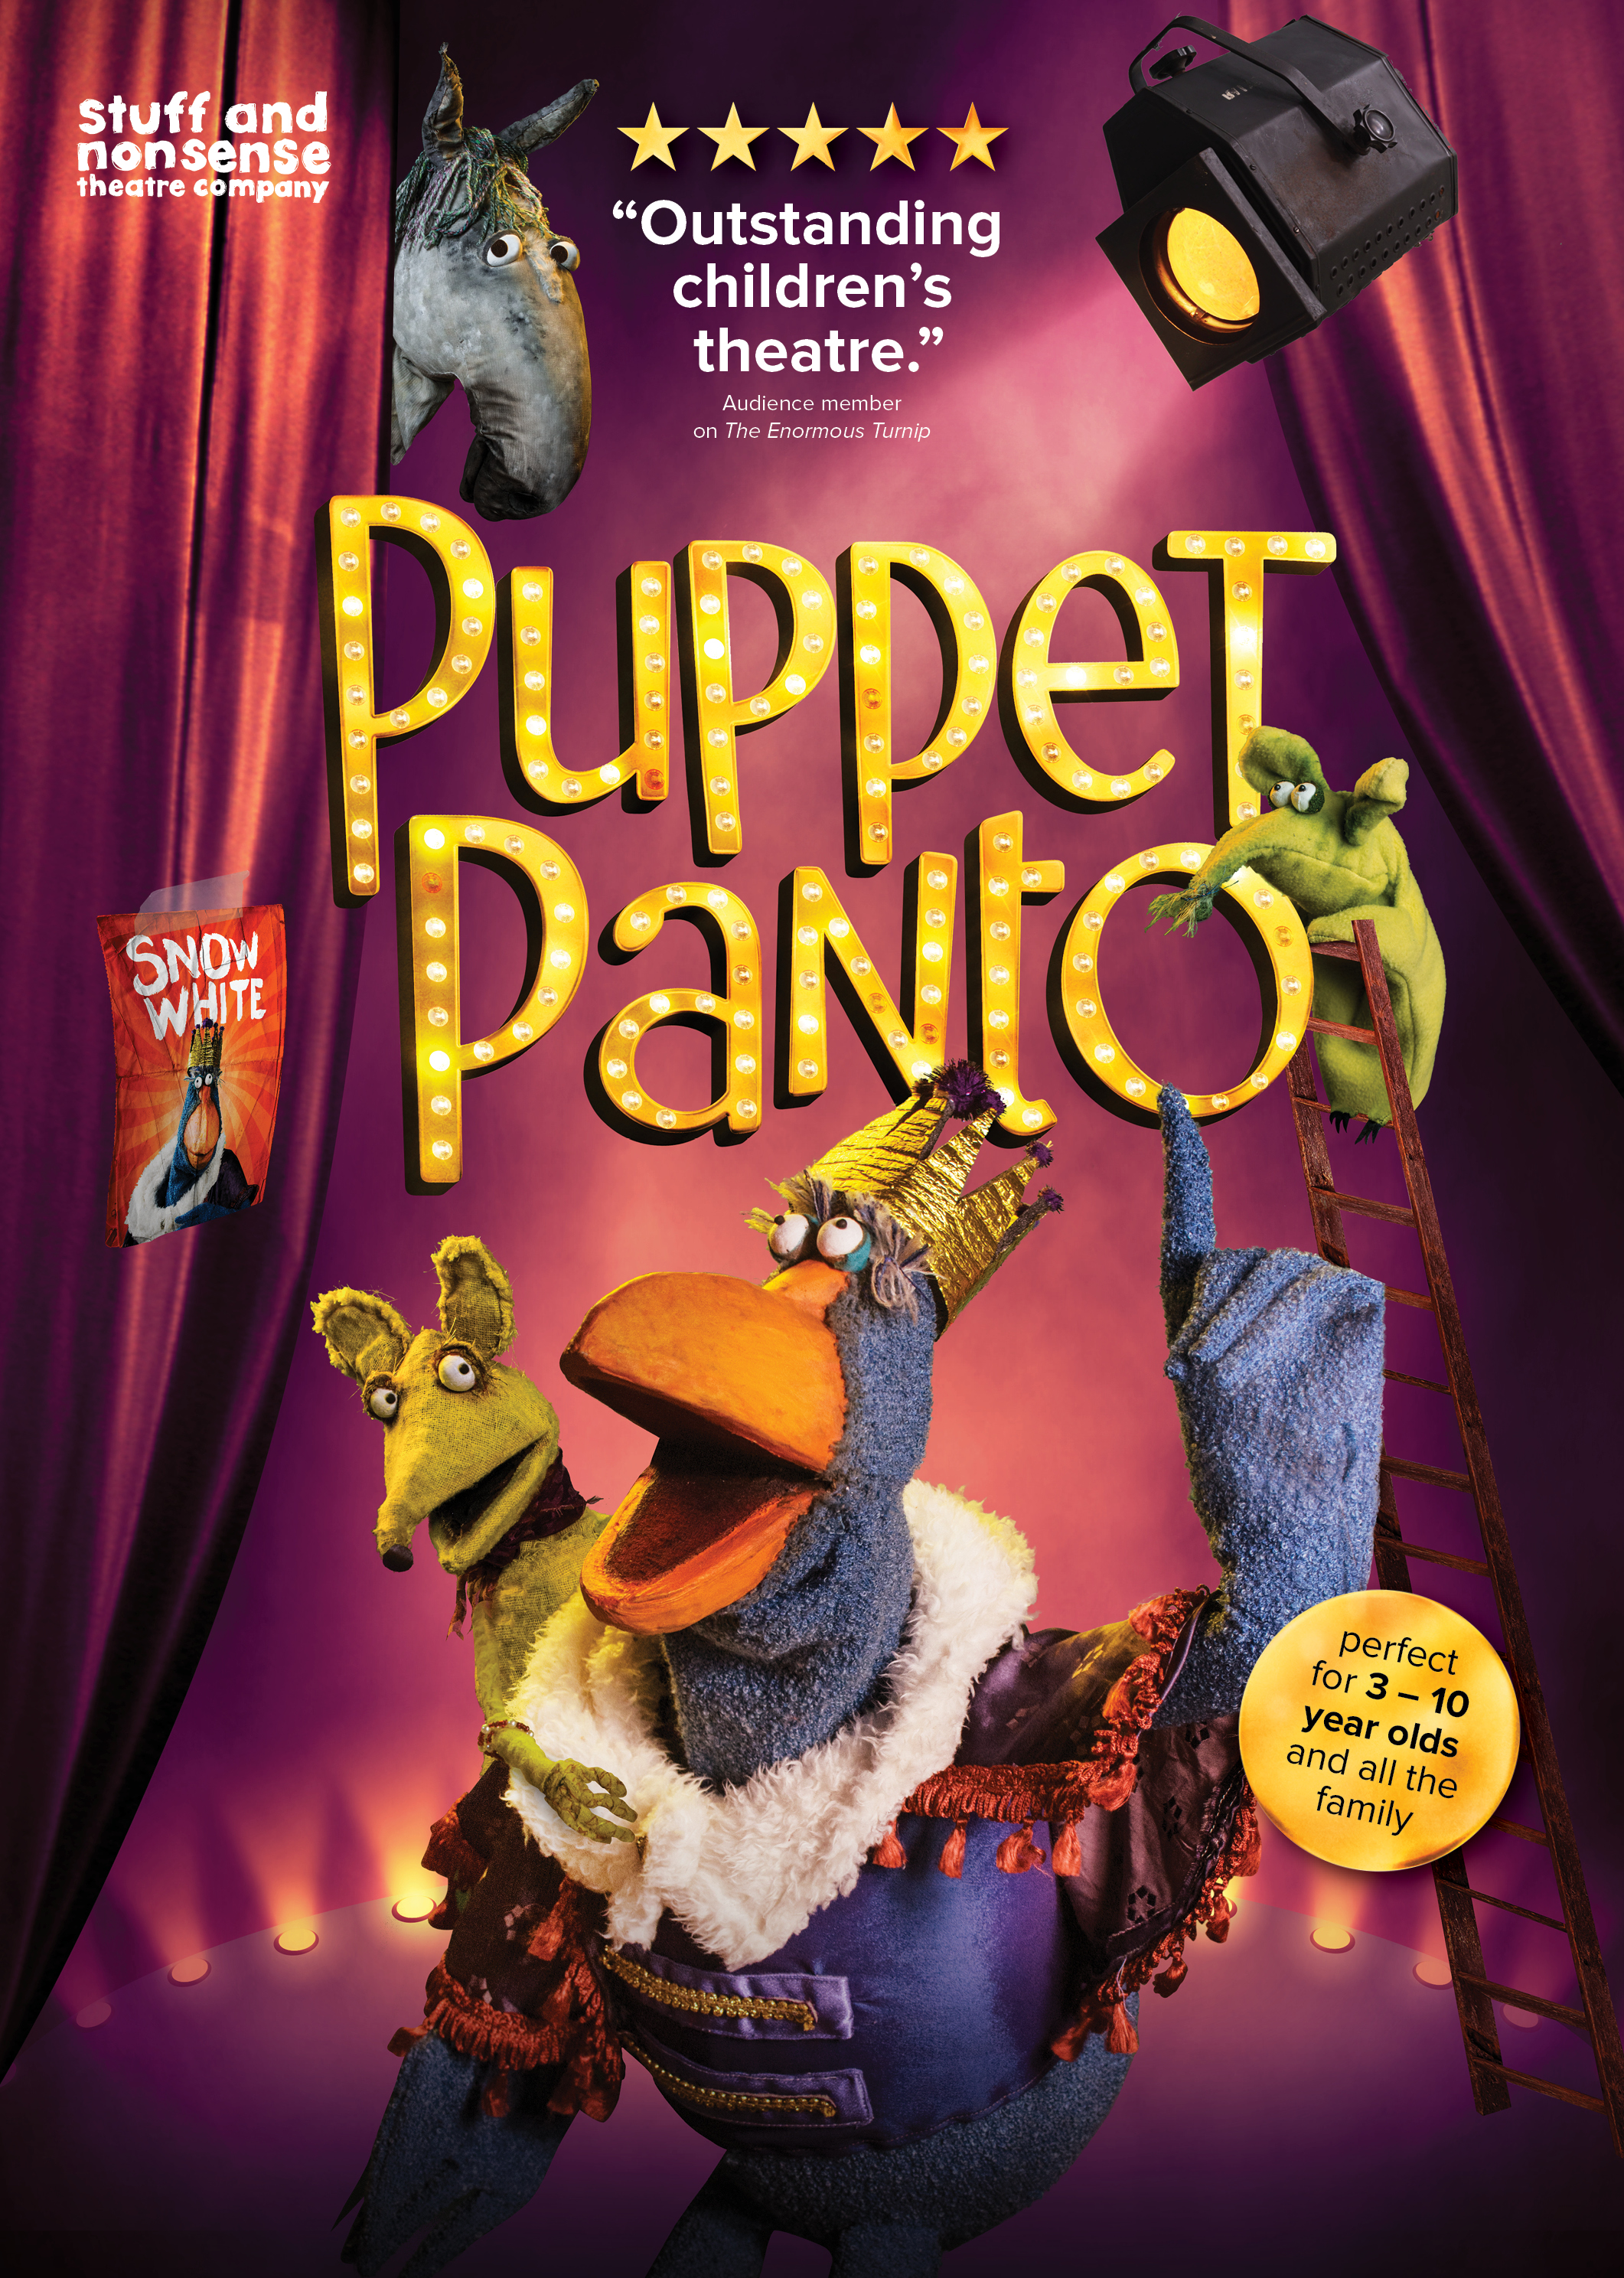 Puppet Panto revealed